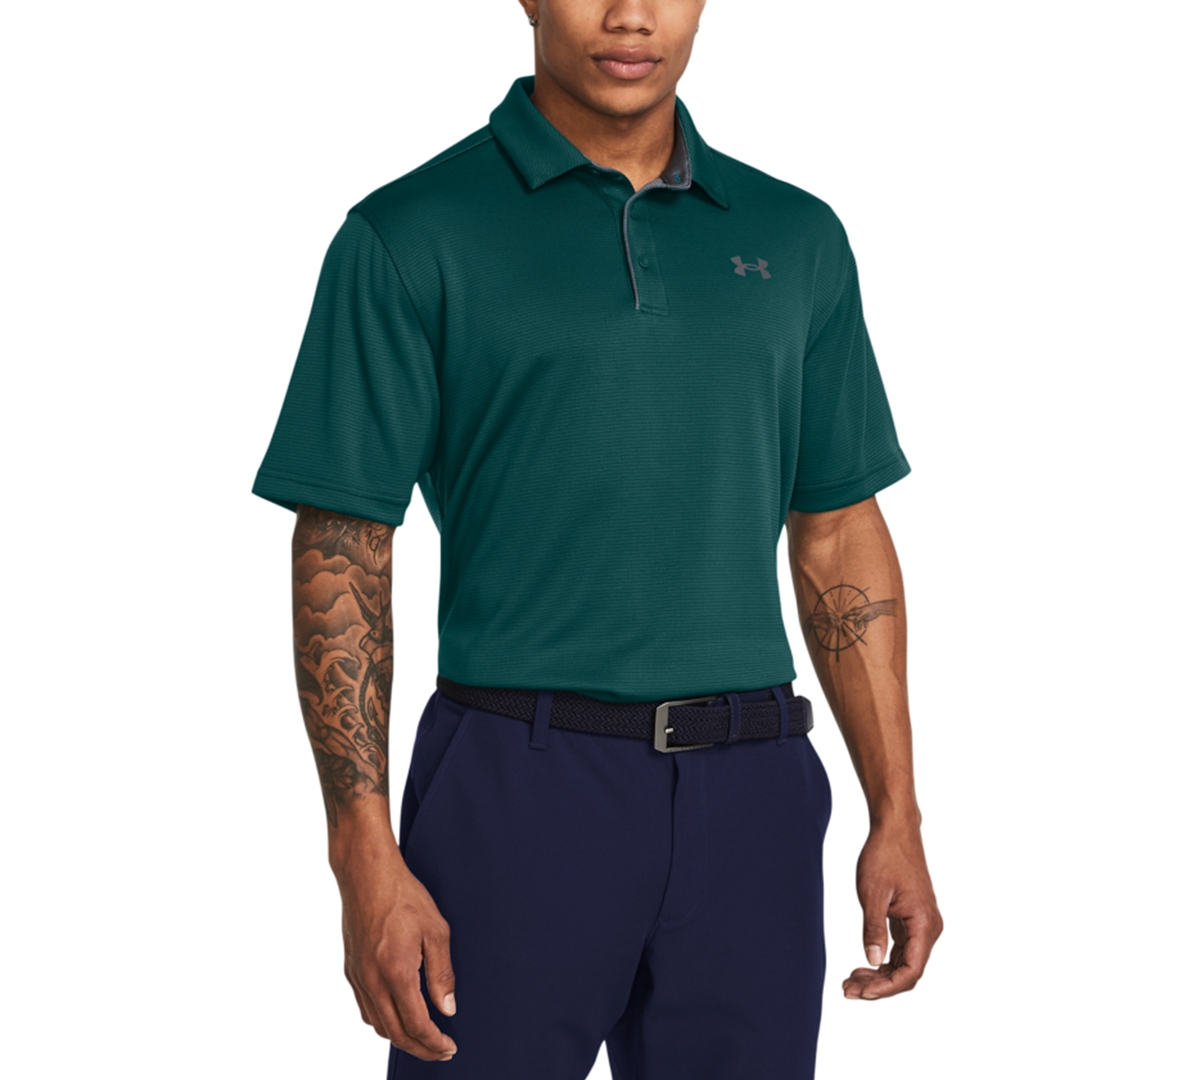 Under Armour Men's Tech Polo T-shirt In Hydro Teal